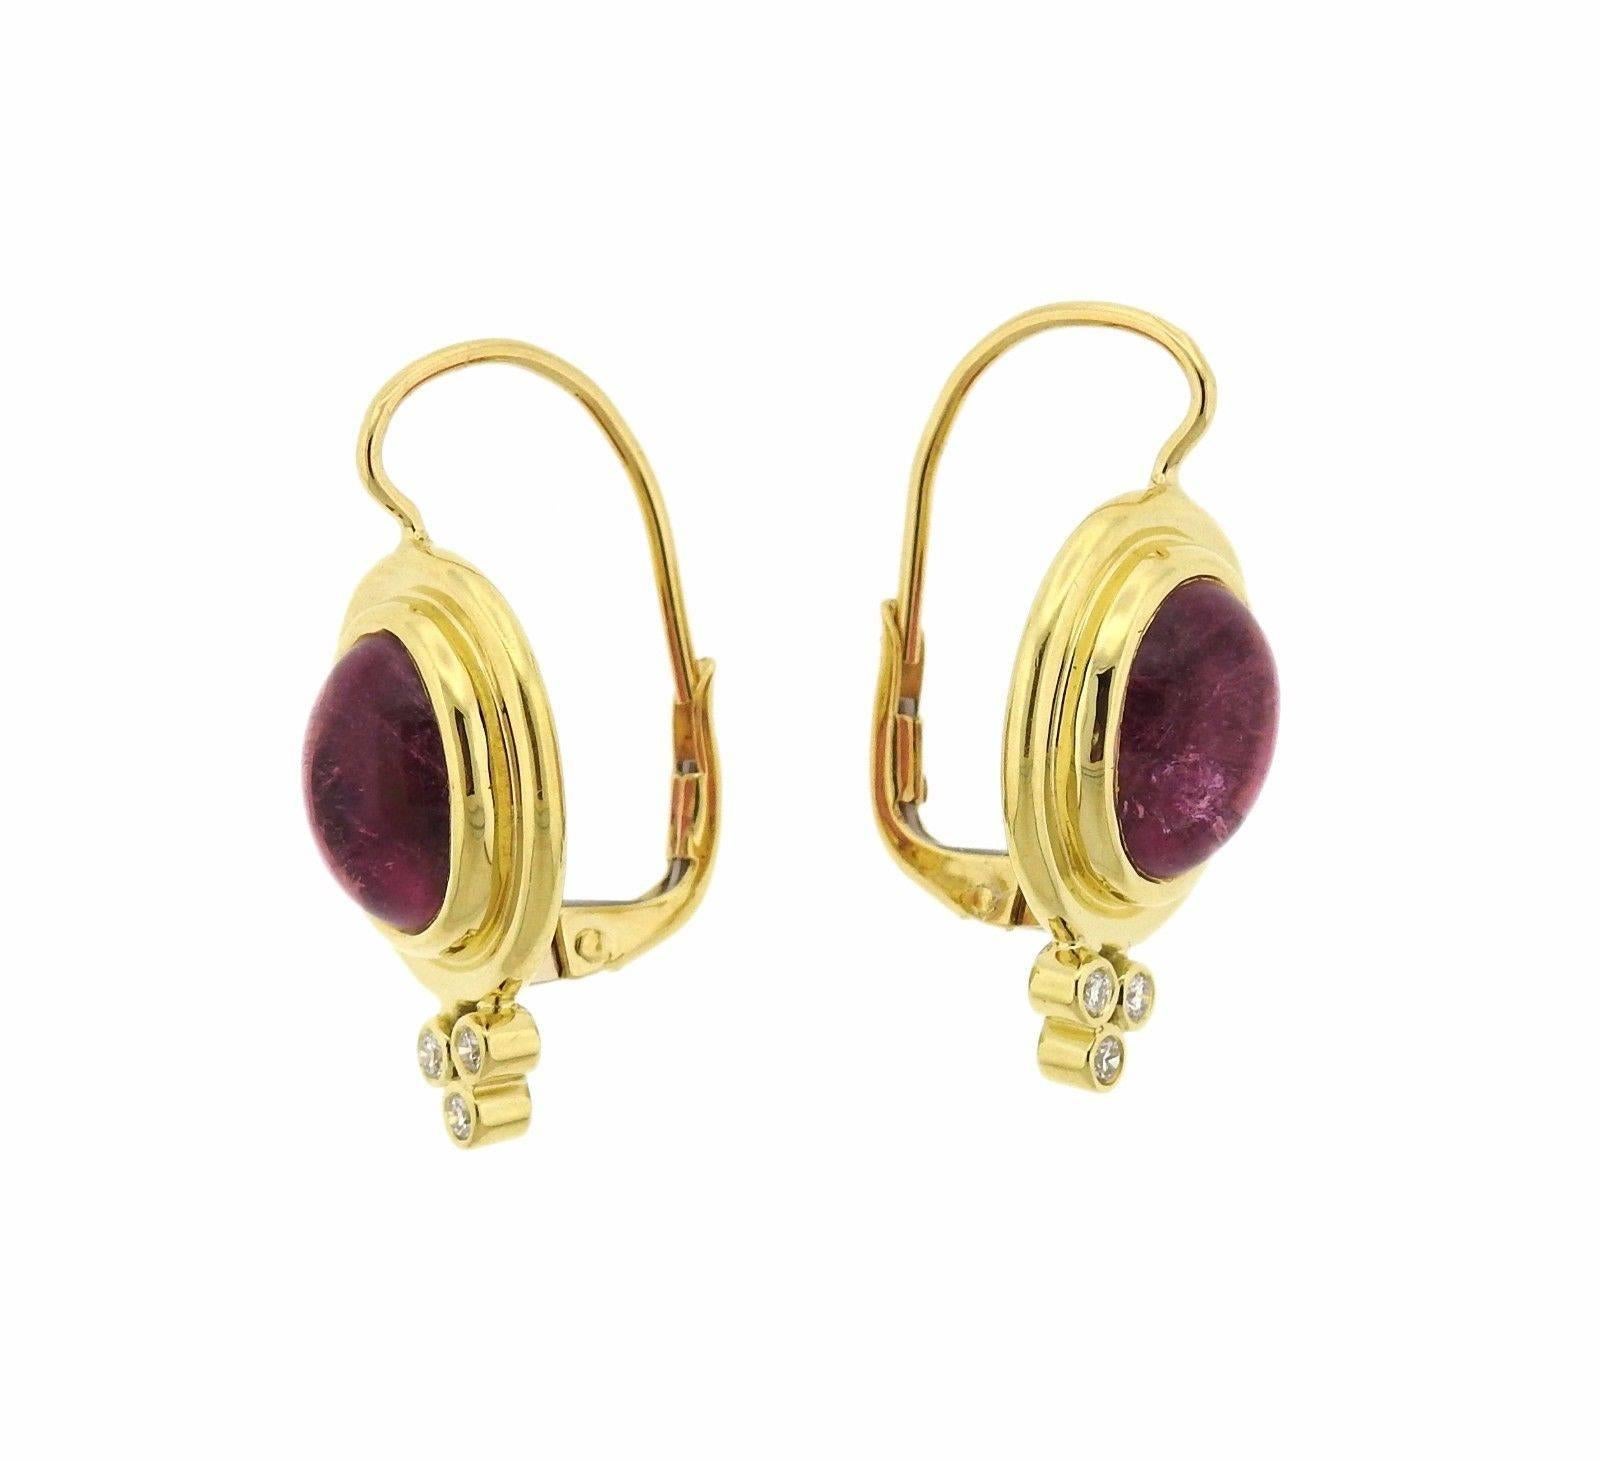 A pair of 18k yellow gold earrings set with pink tourmaline cabochons as well as 0.09ctw of G/VS diamonds.  The earrings measure 23mm long including wire x 12mm wide.  The weight of the pair is 6.8 grams.  Marked: Temple mark, 750.  Retail is $3300.